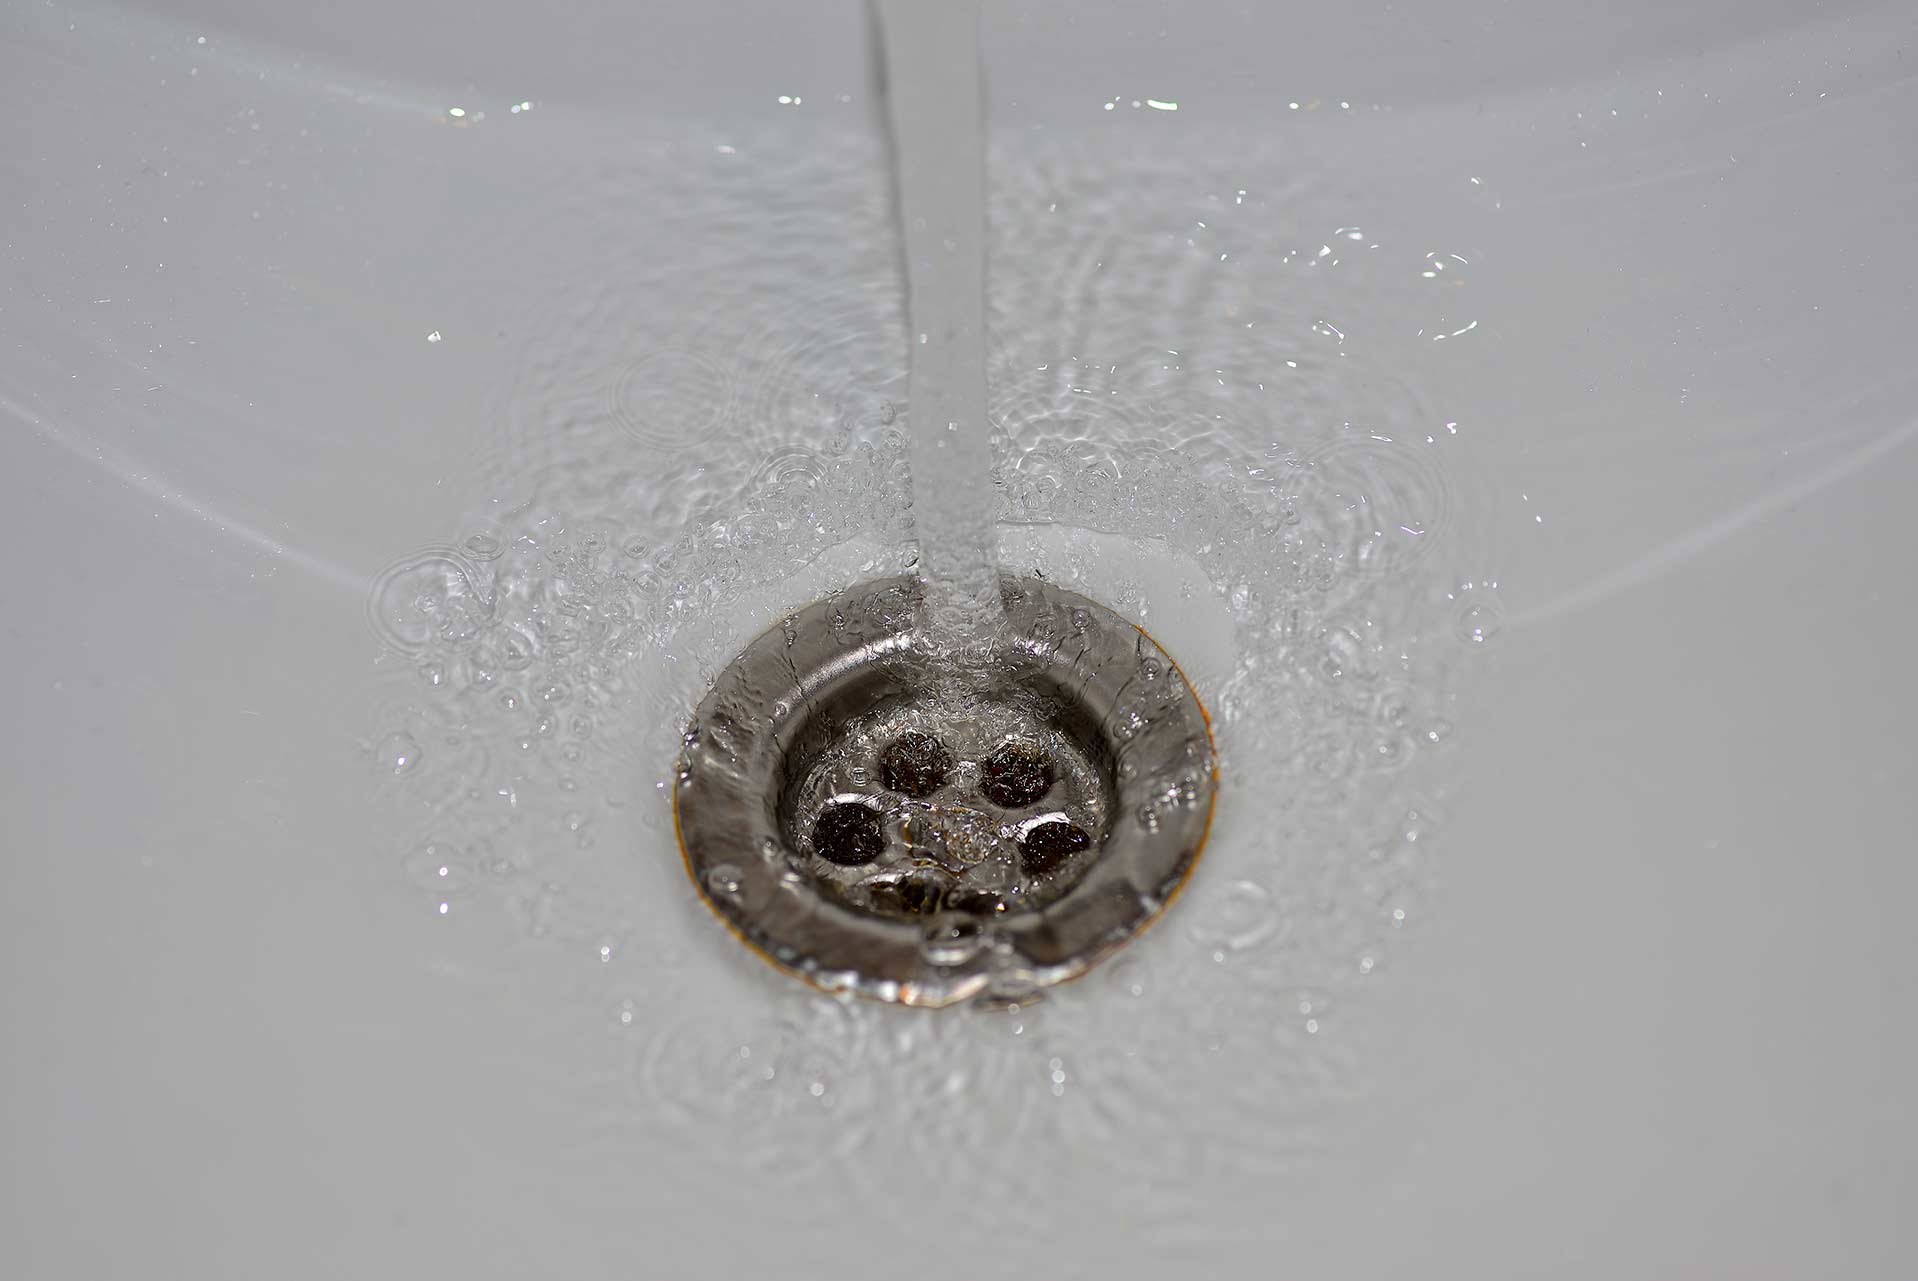 A2B Drains provides services to unblock blocked sinks and drains for properties in Dunfermline.